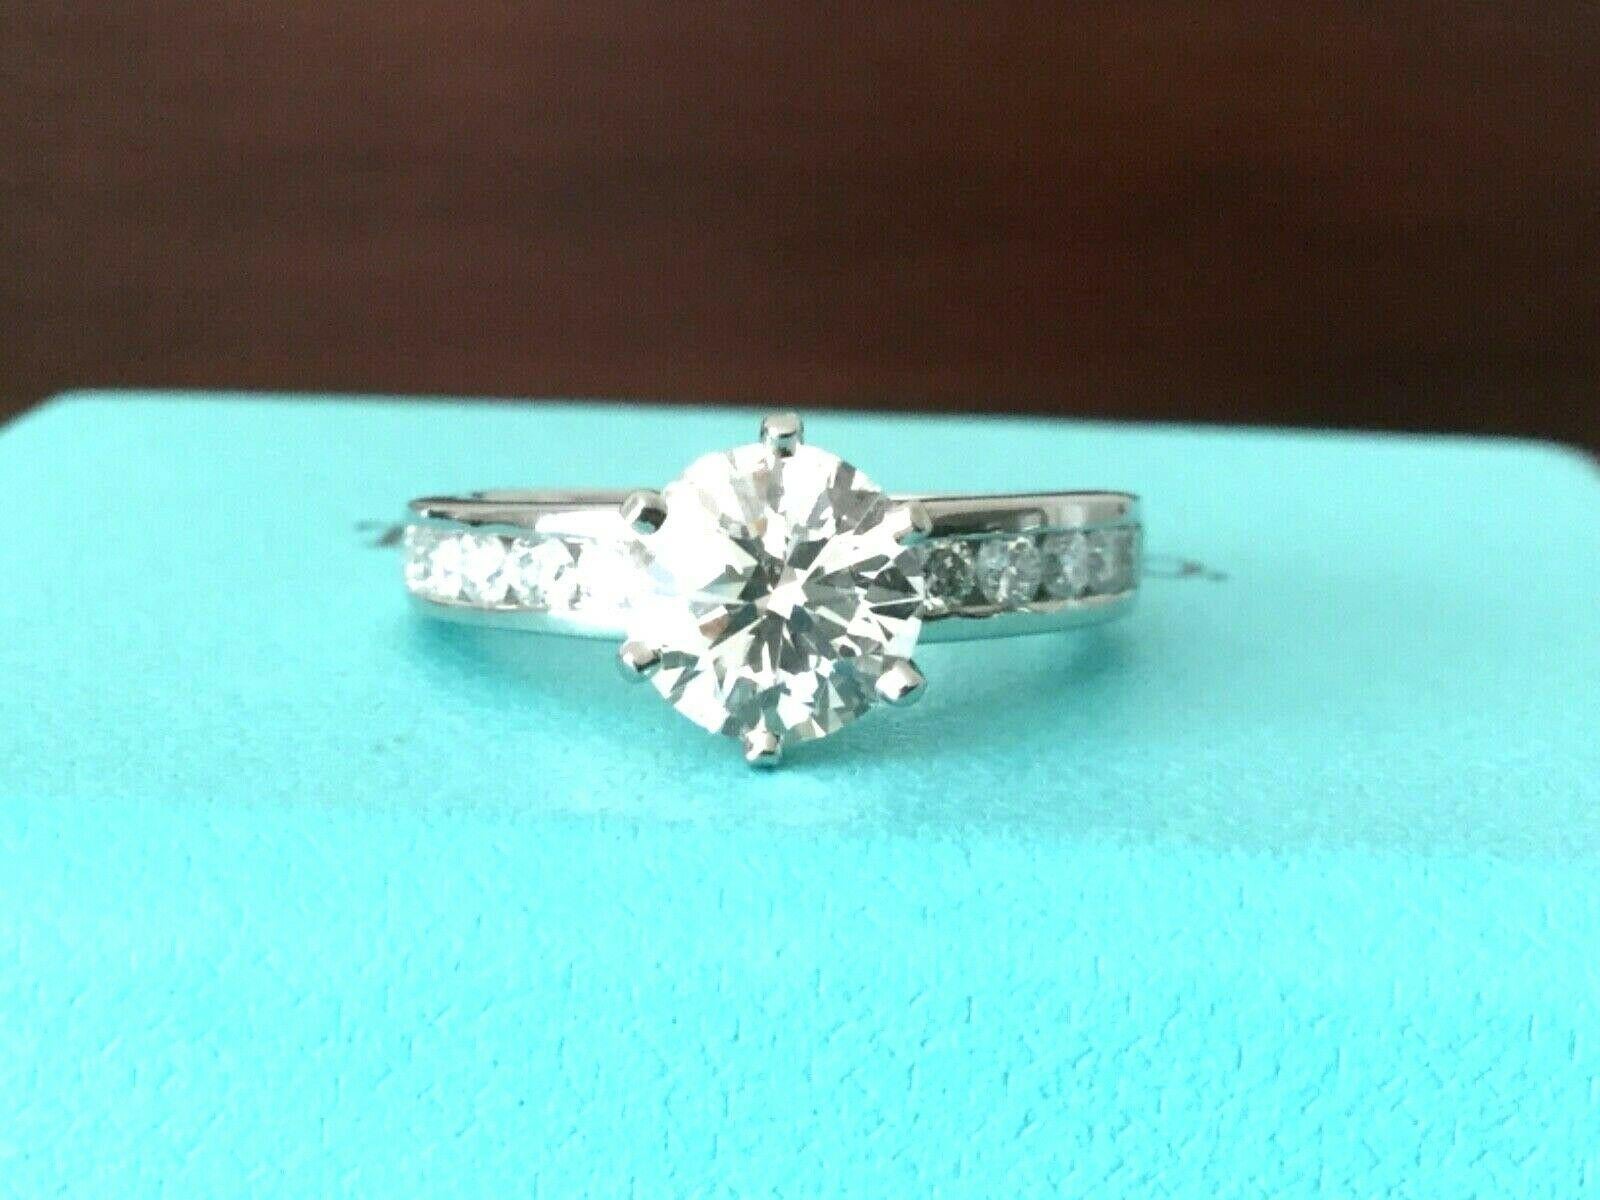 Being offered for your consideration is a like new classic Tiffany & Co Platinum and Diamond 1.17 carat natural Round engagement ring set in the classic channel set diamond band (TOTAL CARAT WEIGHT IS 1.50 carats)..  This ring was hardly worn and